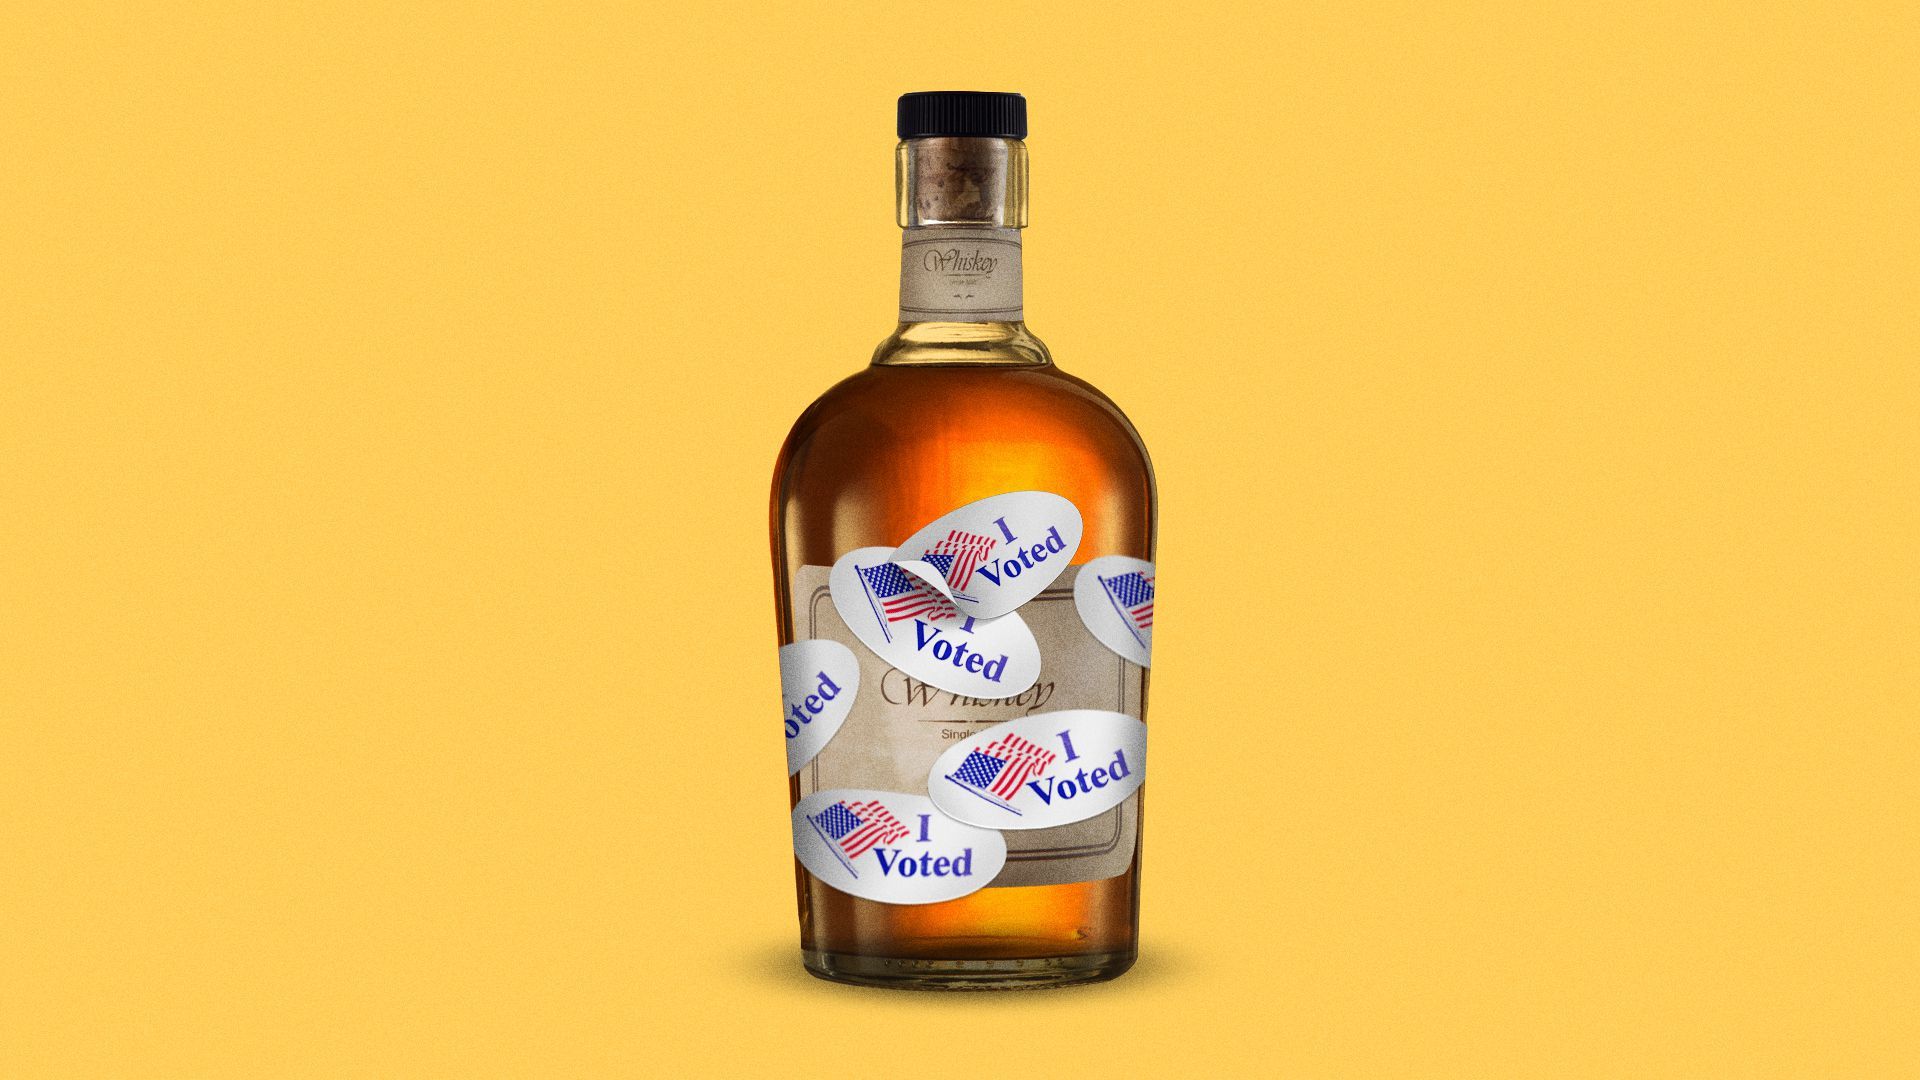 Illustration of a liquor bottle covered in "I Voted" stickers.